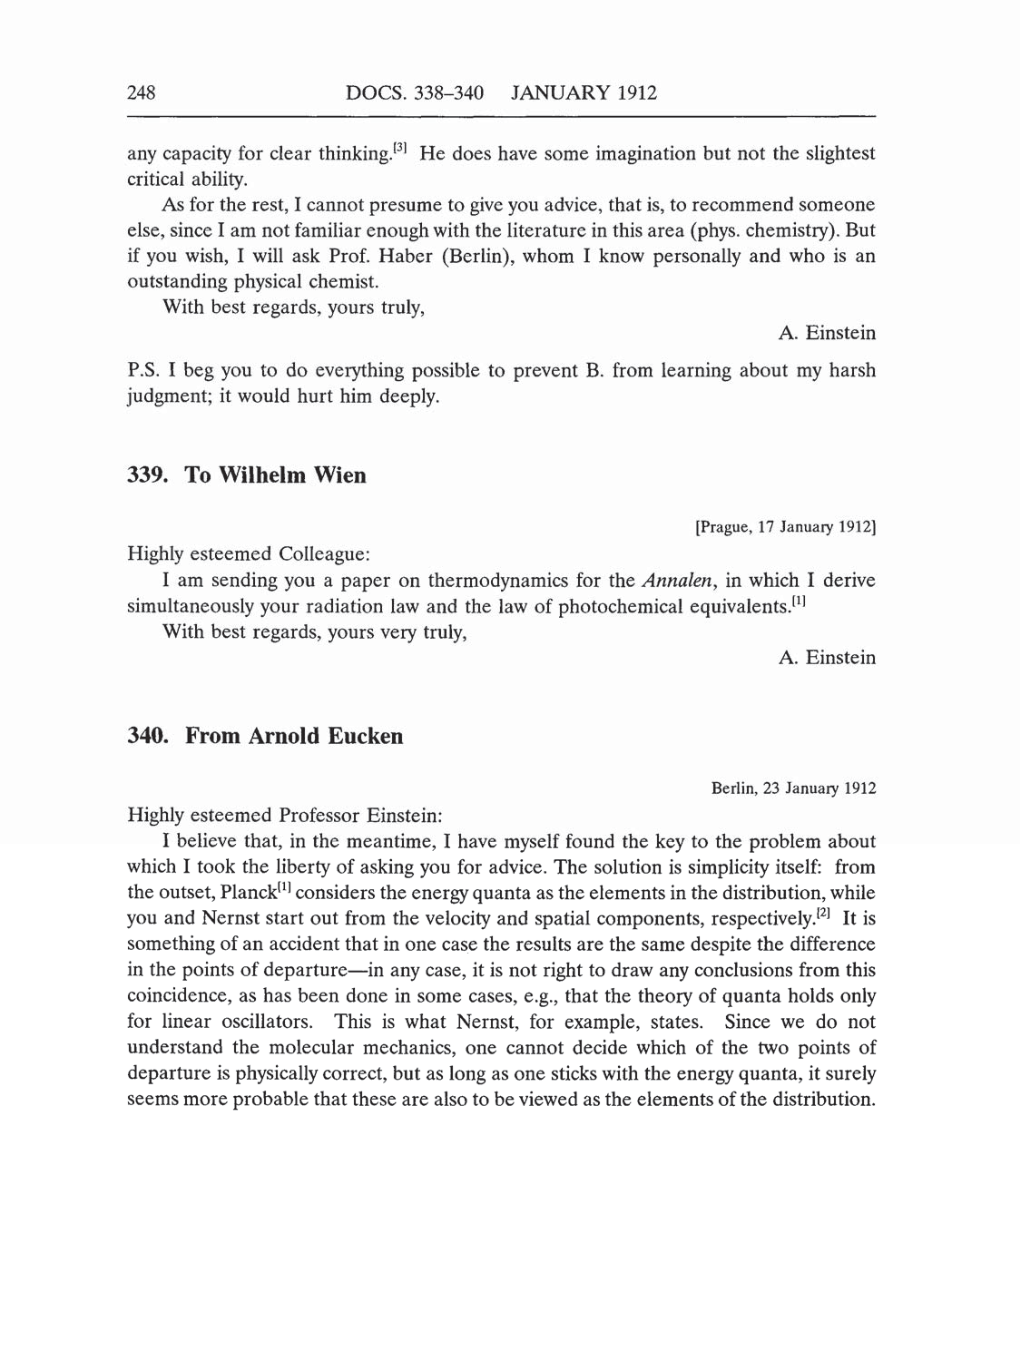 Volume 5: The Swiss Years: Correspondence, 1902-1914 (English translation supplement) page 248